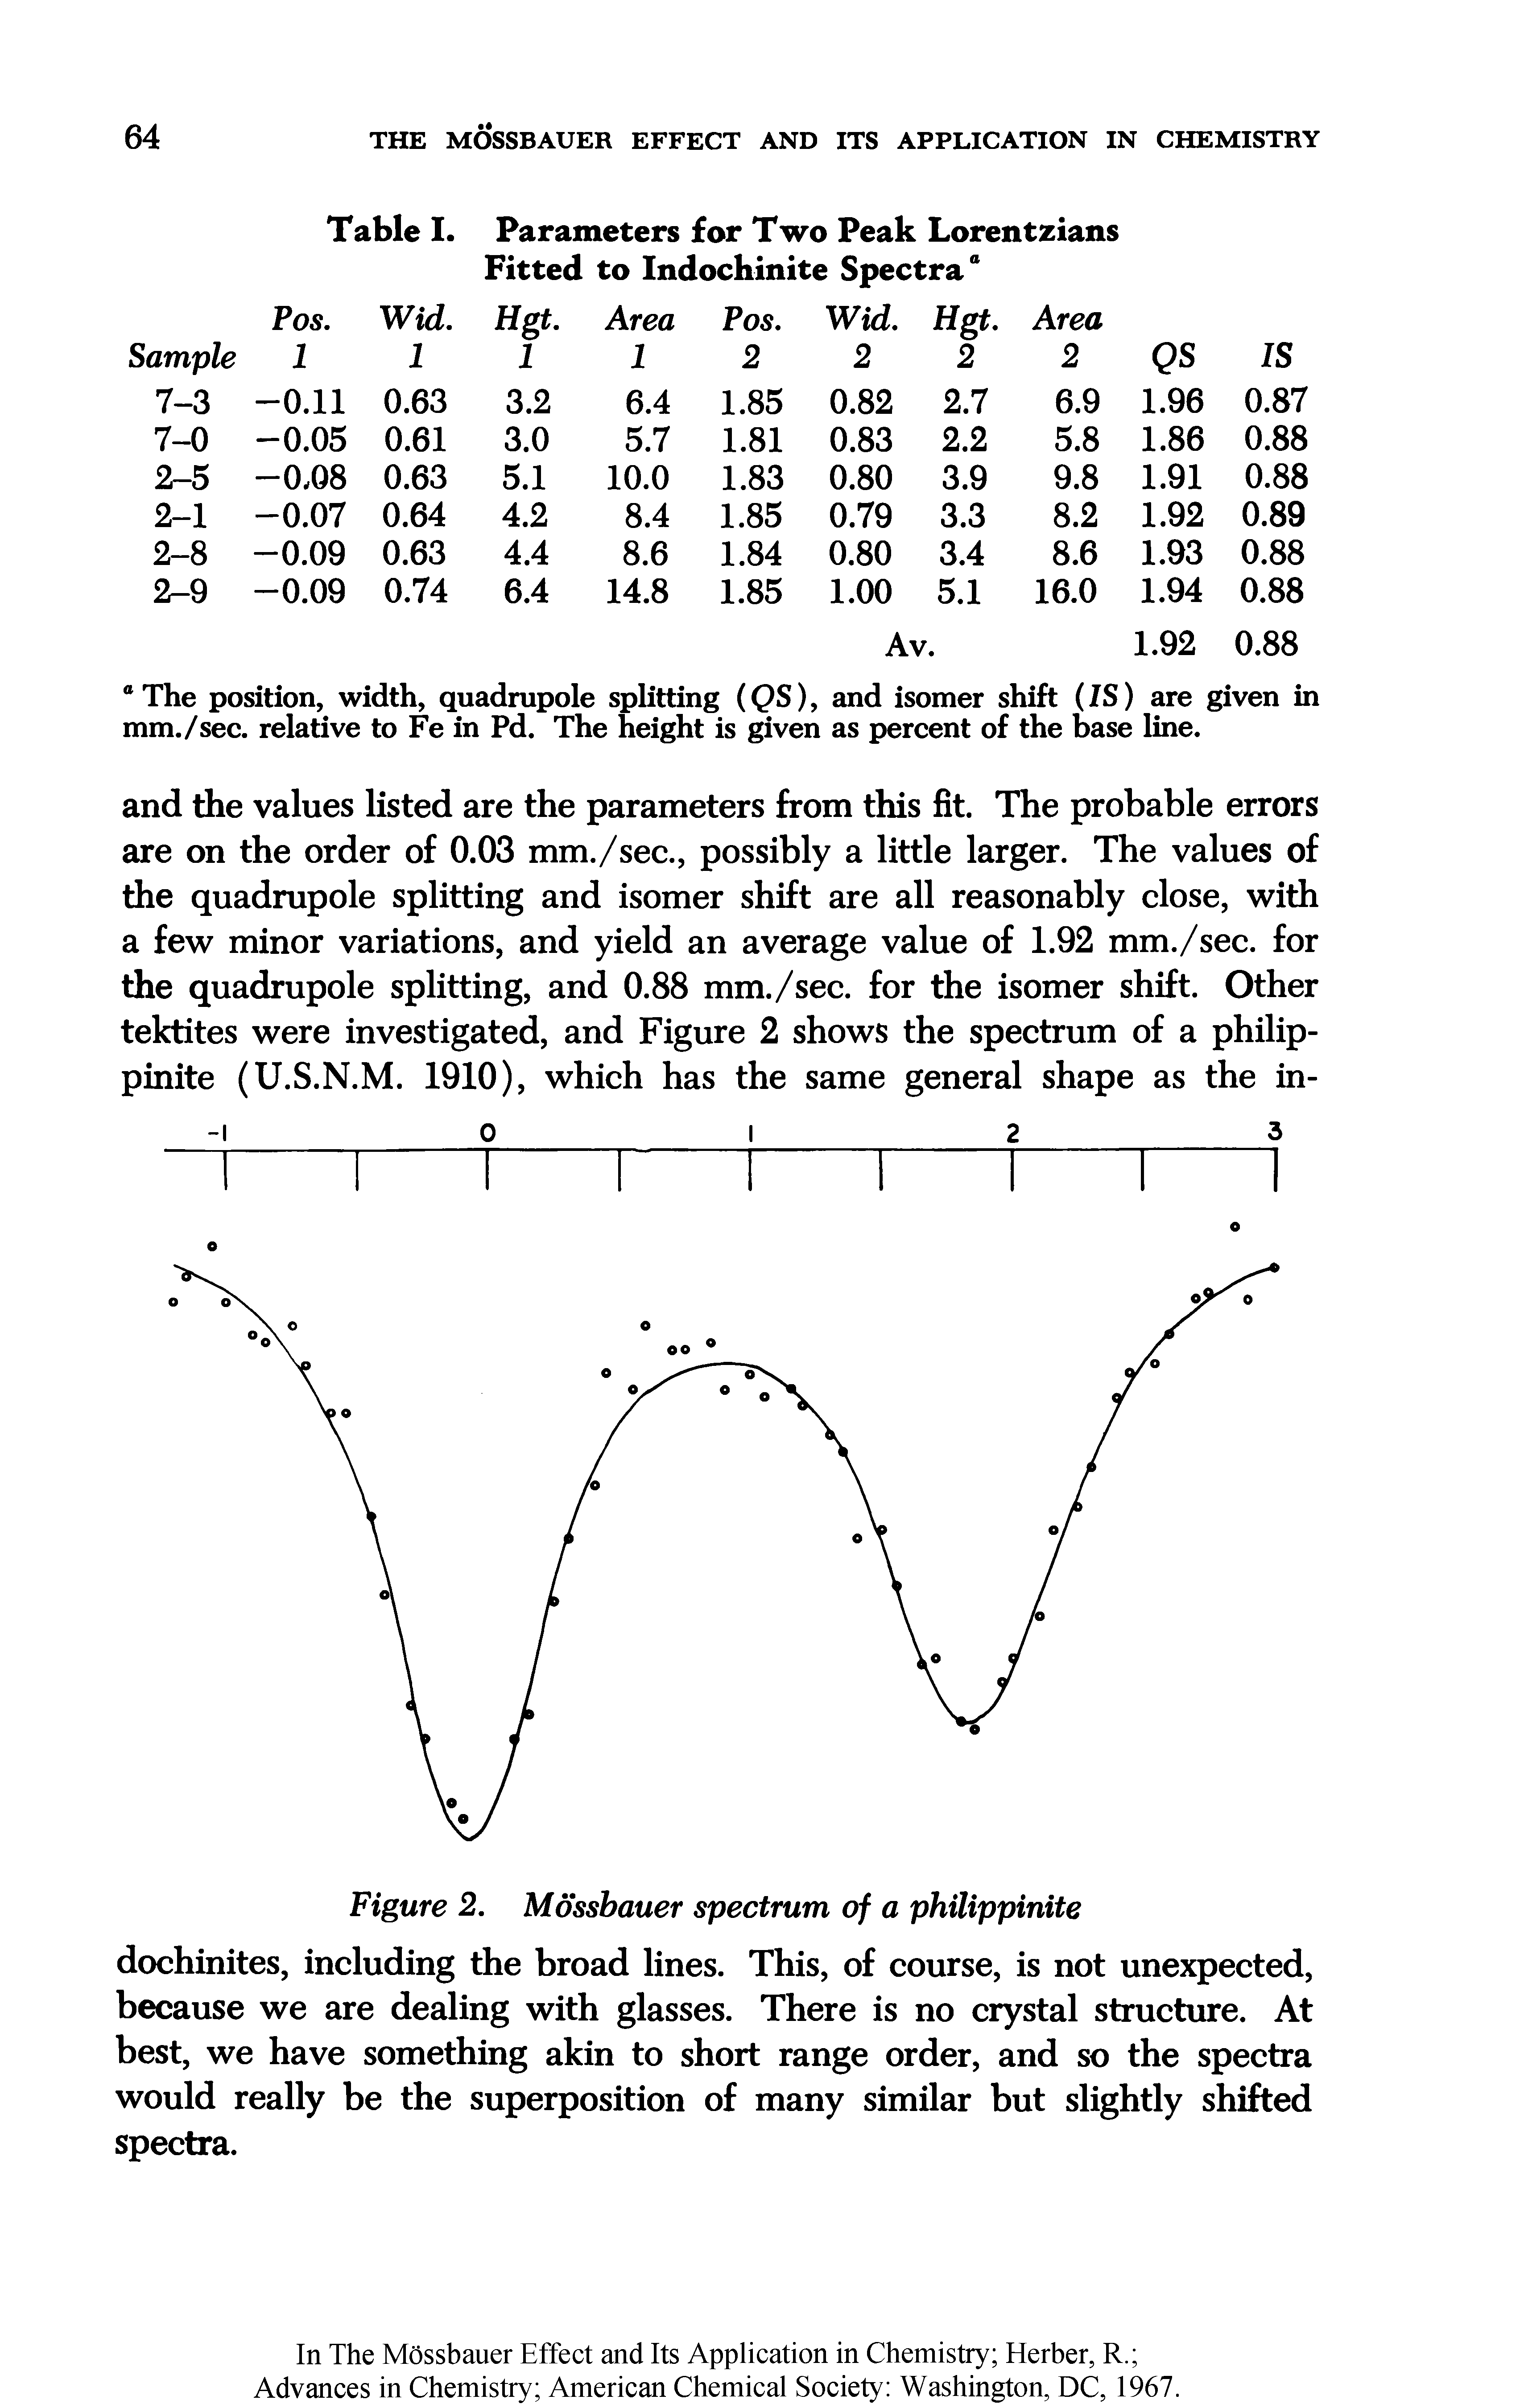 Table I. Parameters for Two Peak Lorentzians Fitted to Indochinite Spectra"...